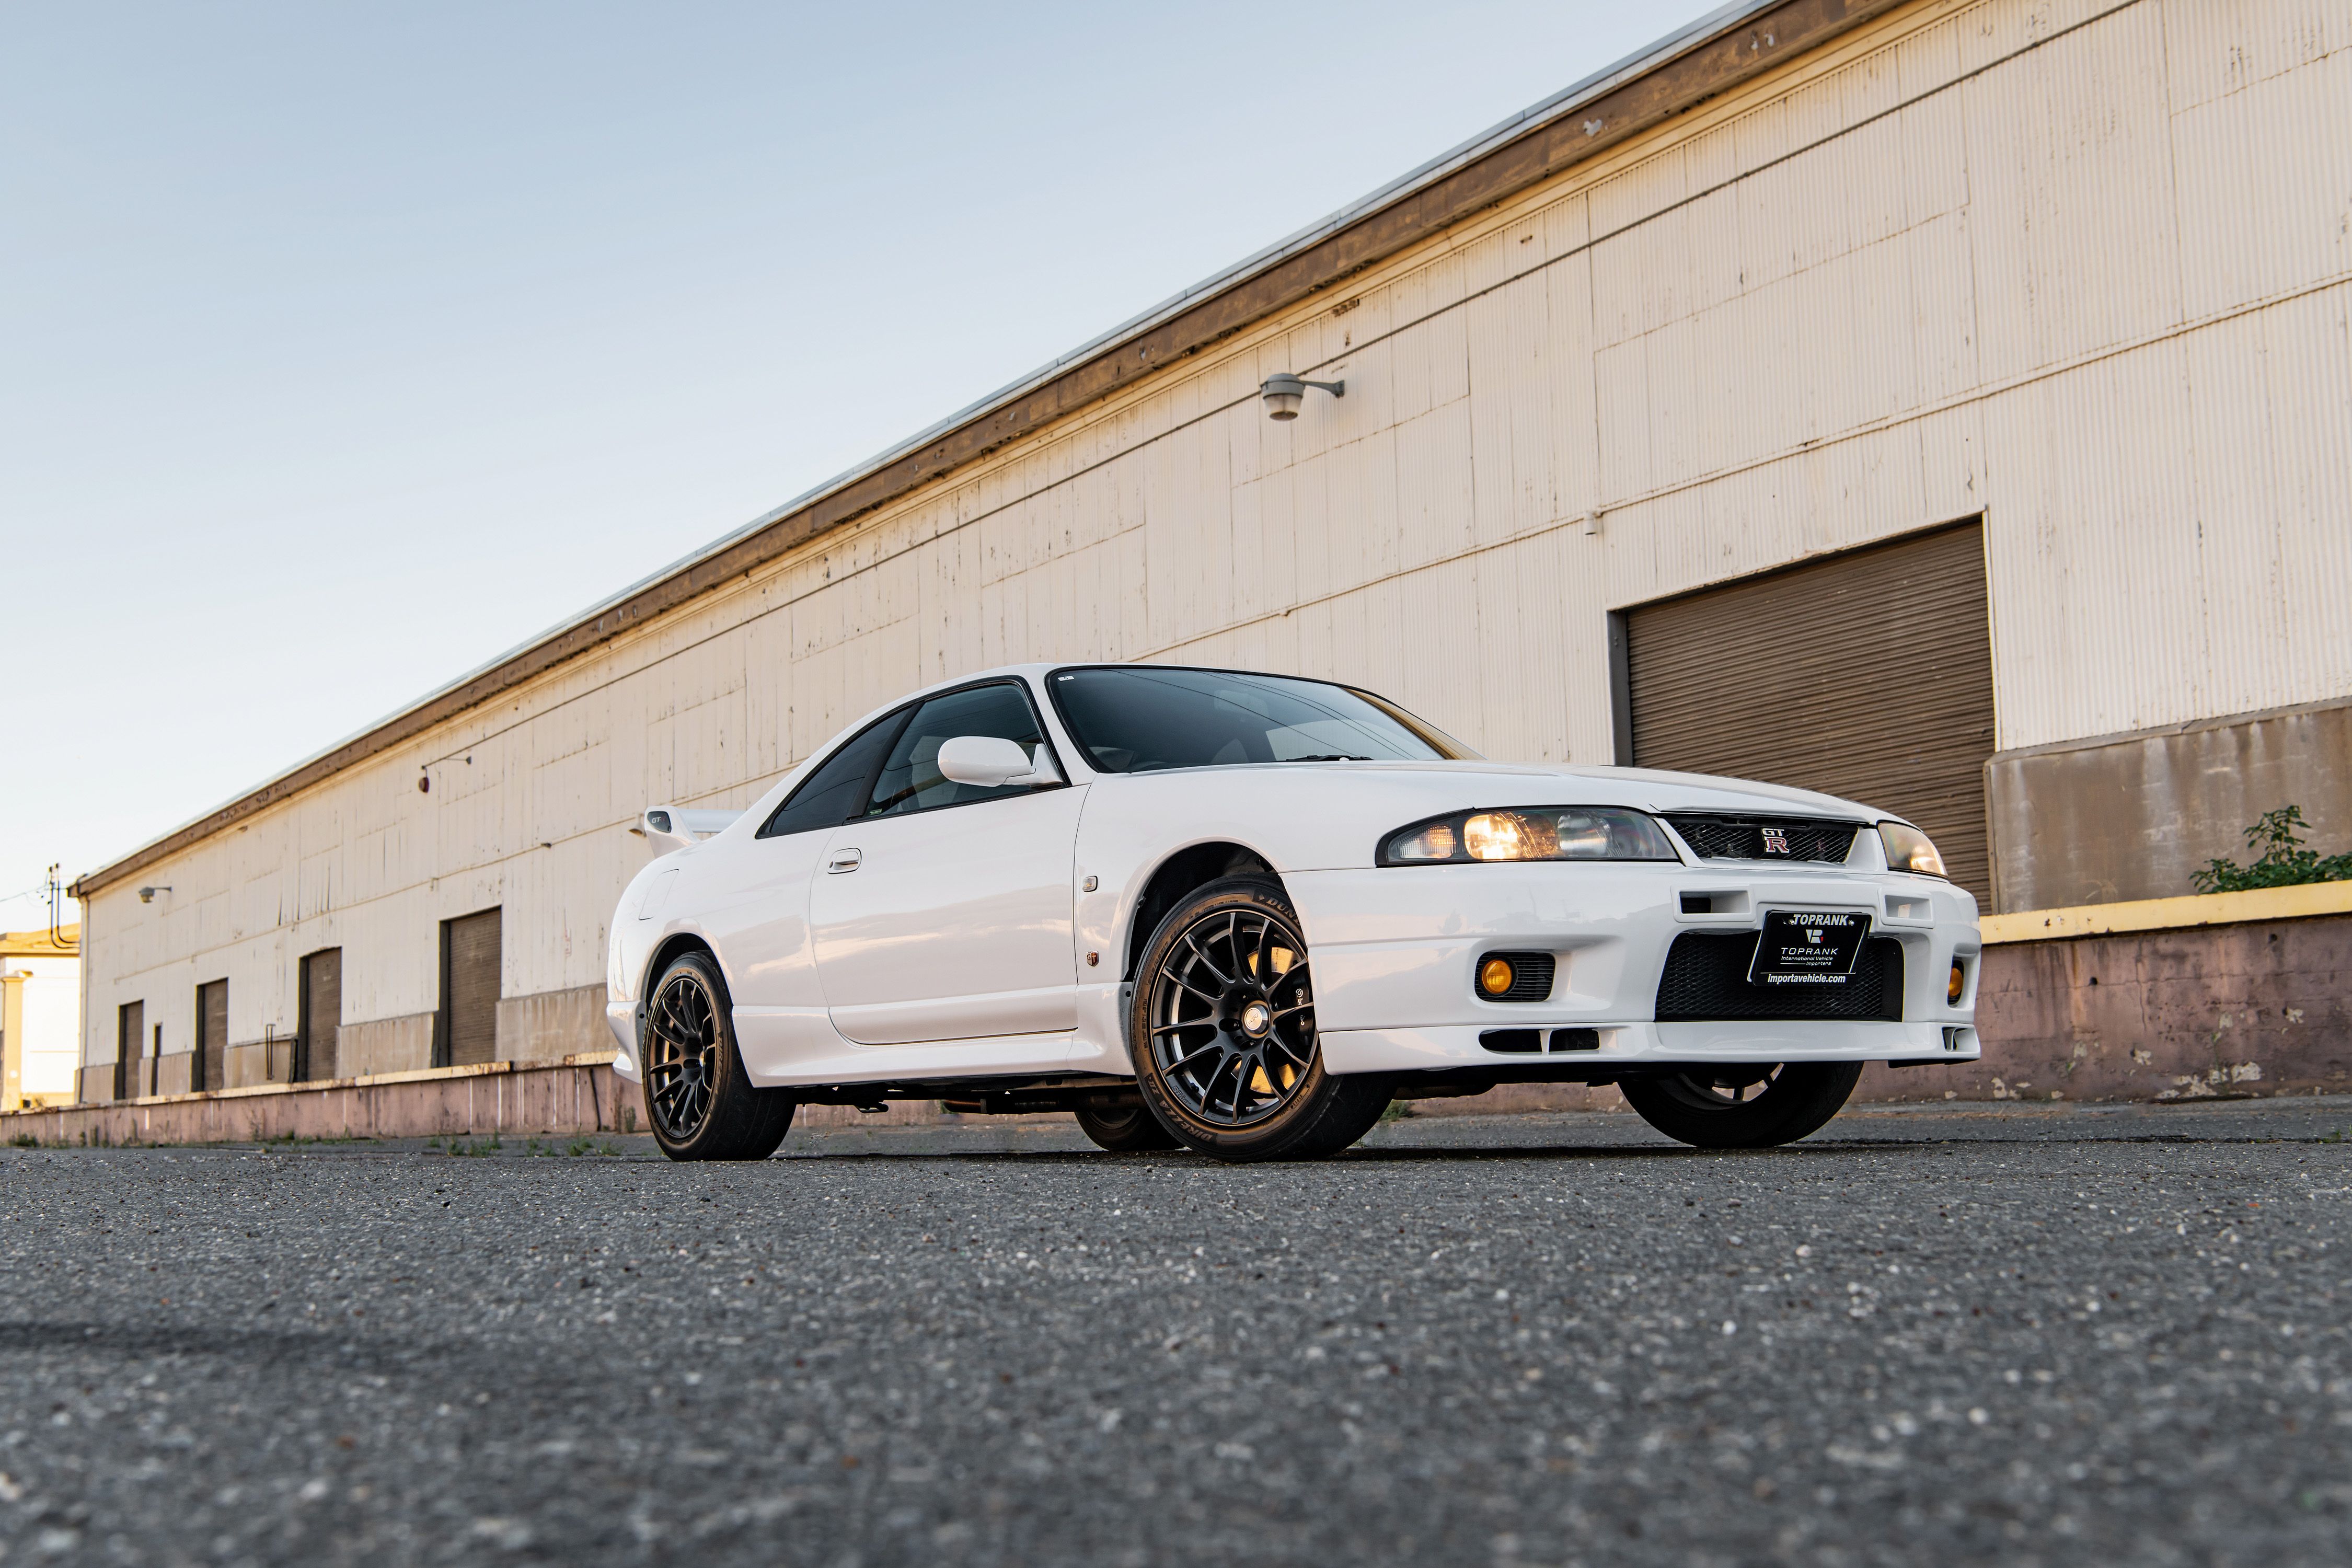 View Photos of the 1995 Nissan Skyline R33 GT-R